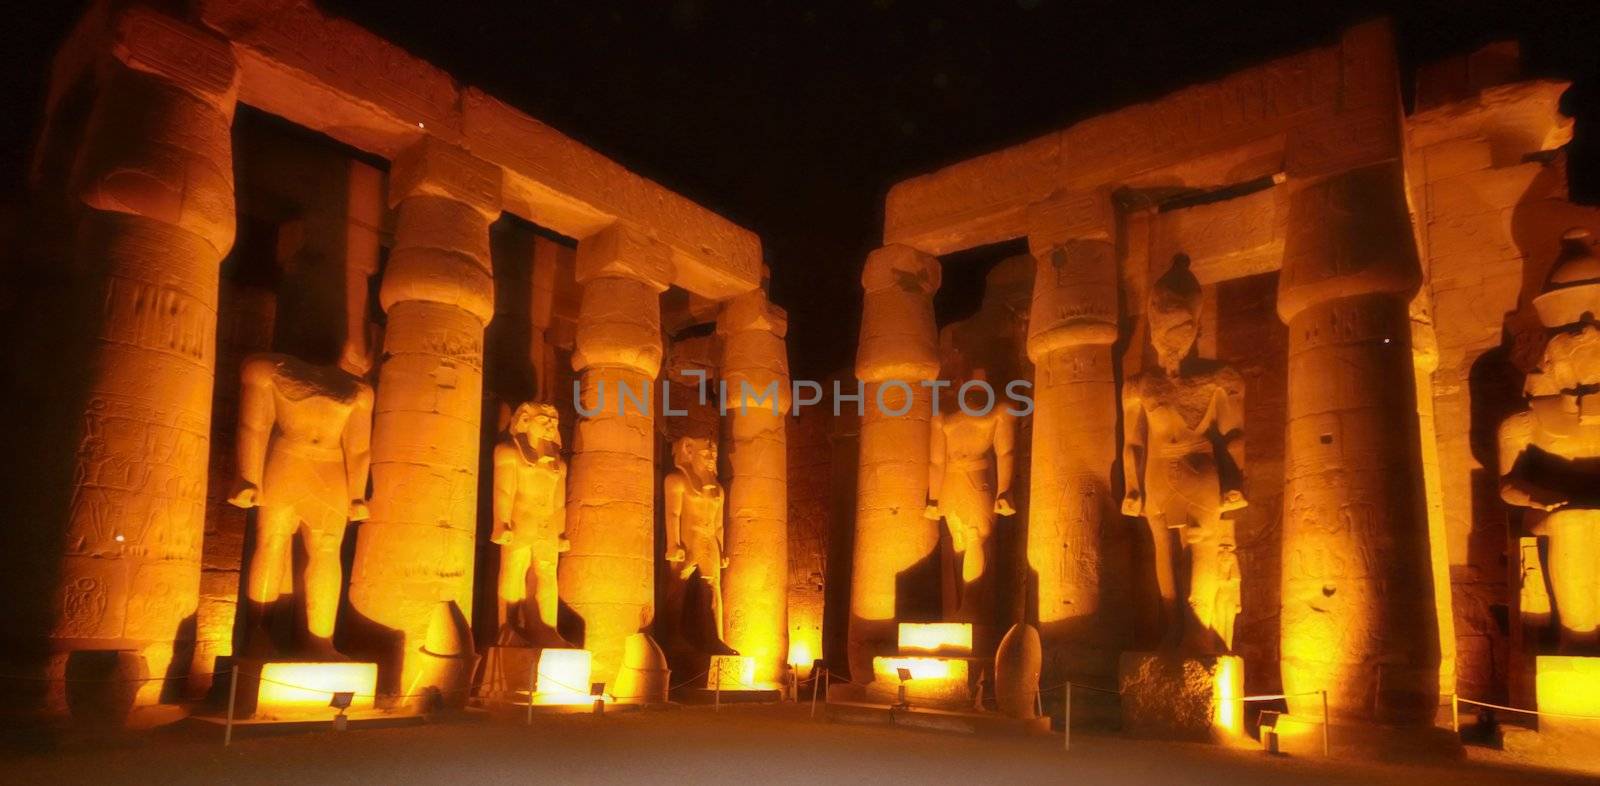 Luxor temple at night, Egypt  by jnerad